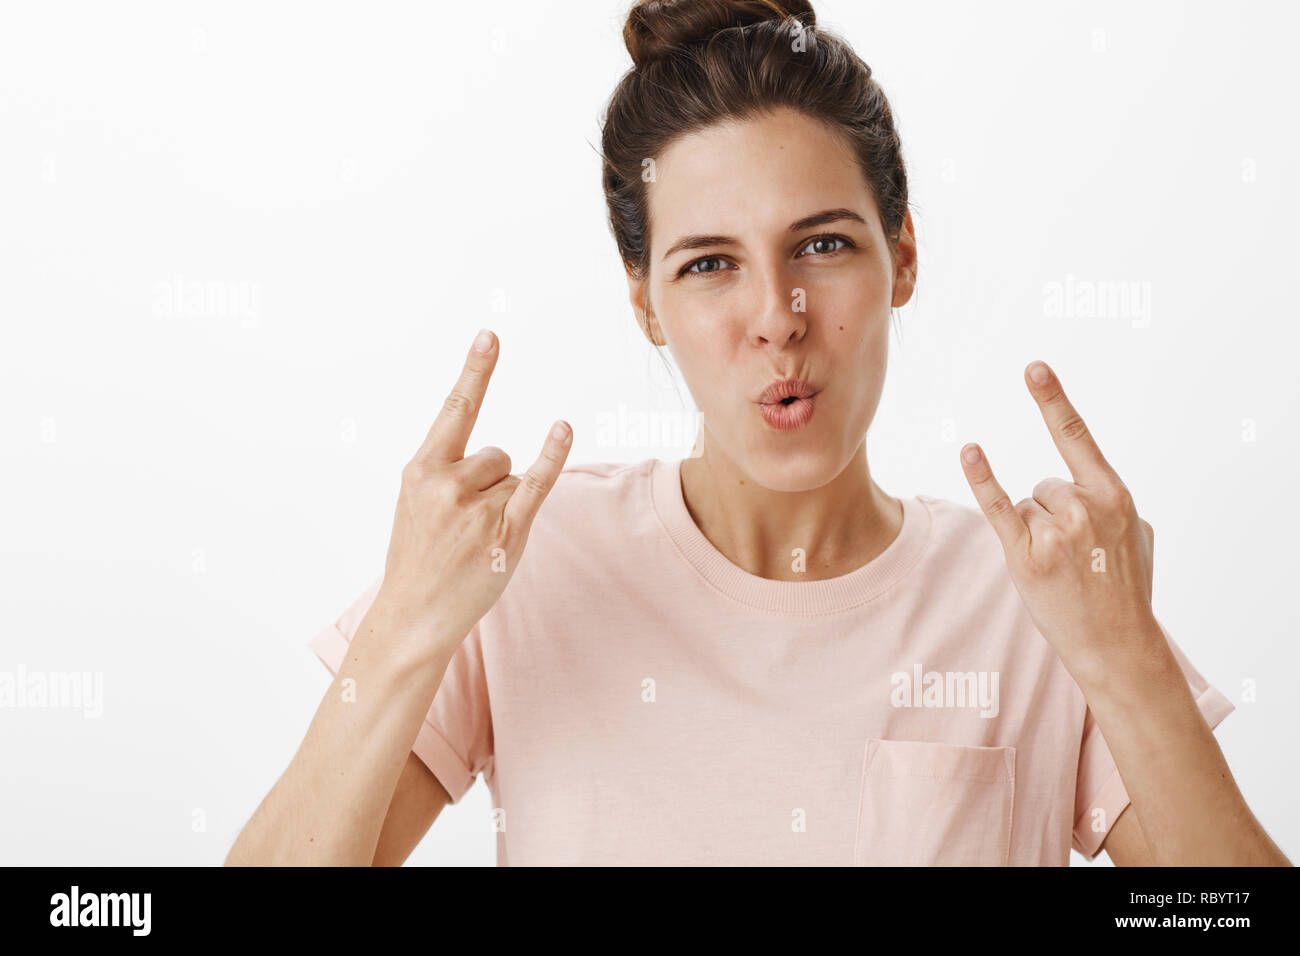 Girls rock this world. Portrait of energized and confident good-looking woman showing rock-n-roll gesture folding lips in cheer making self-assured expression as having fun at party over gray wall Stock Photo